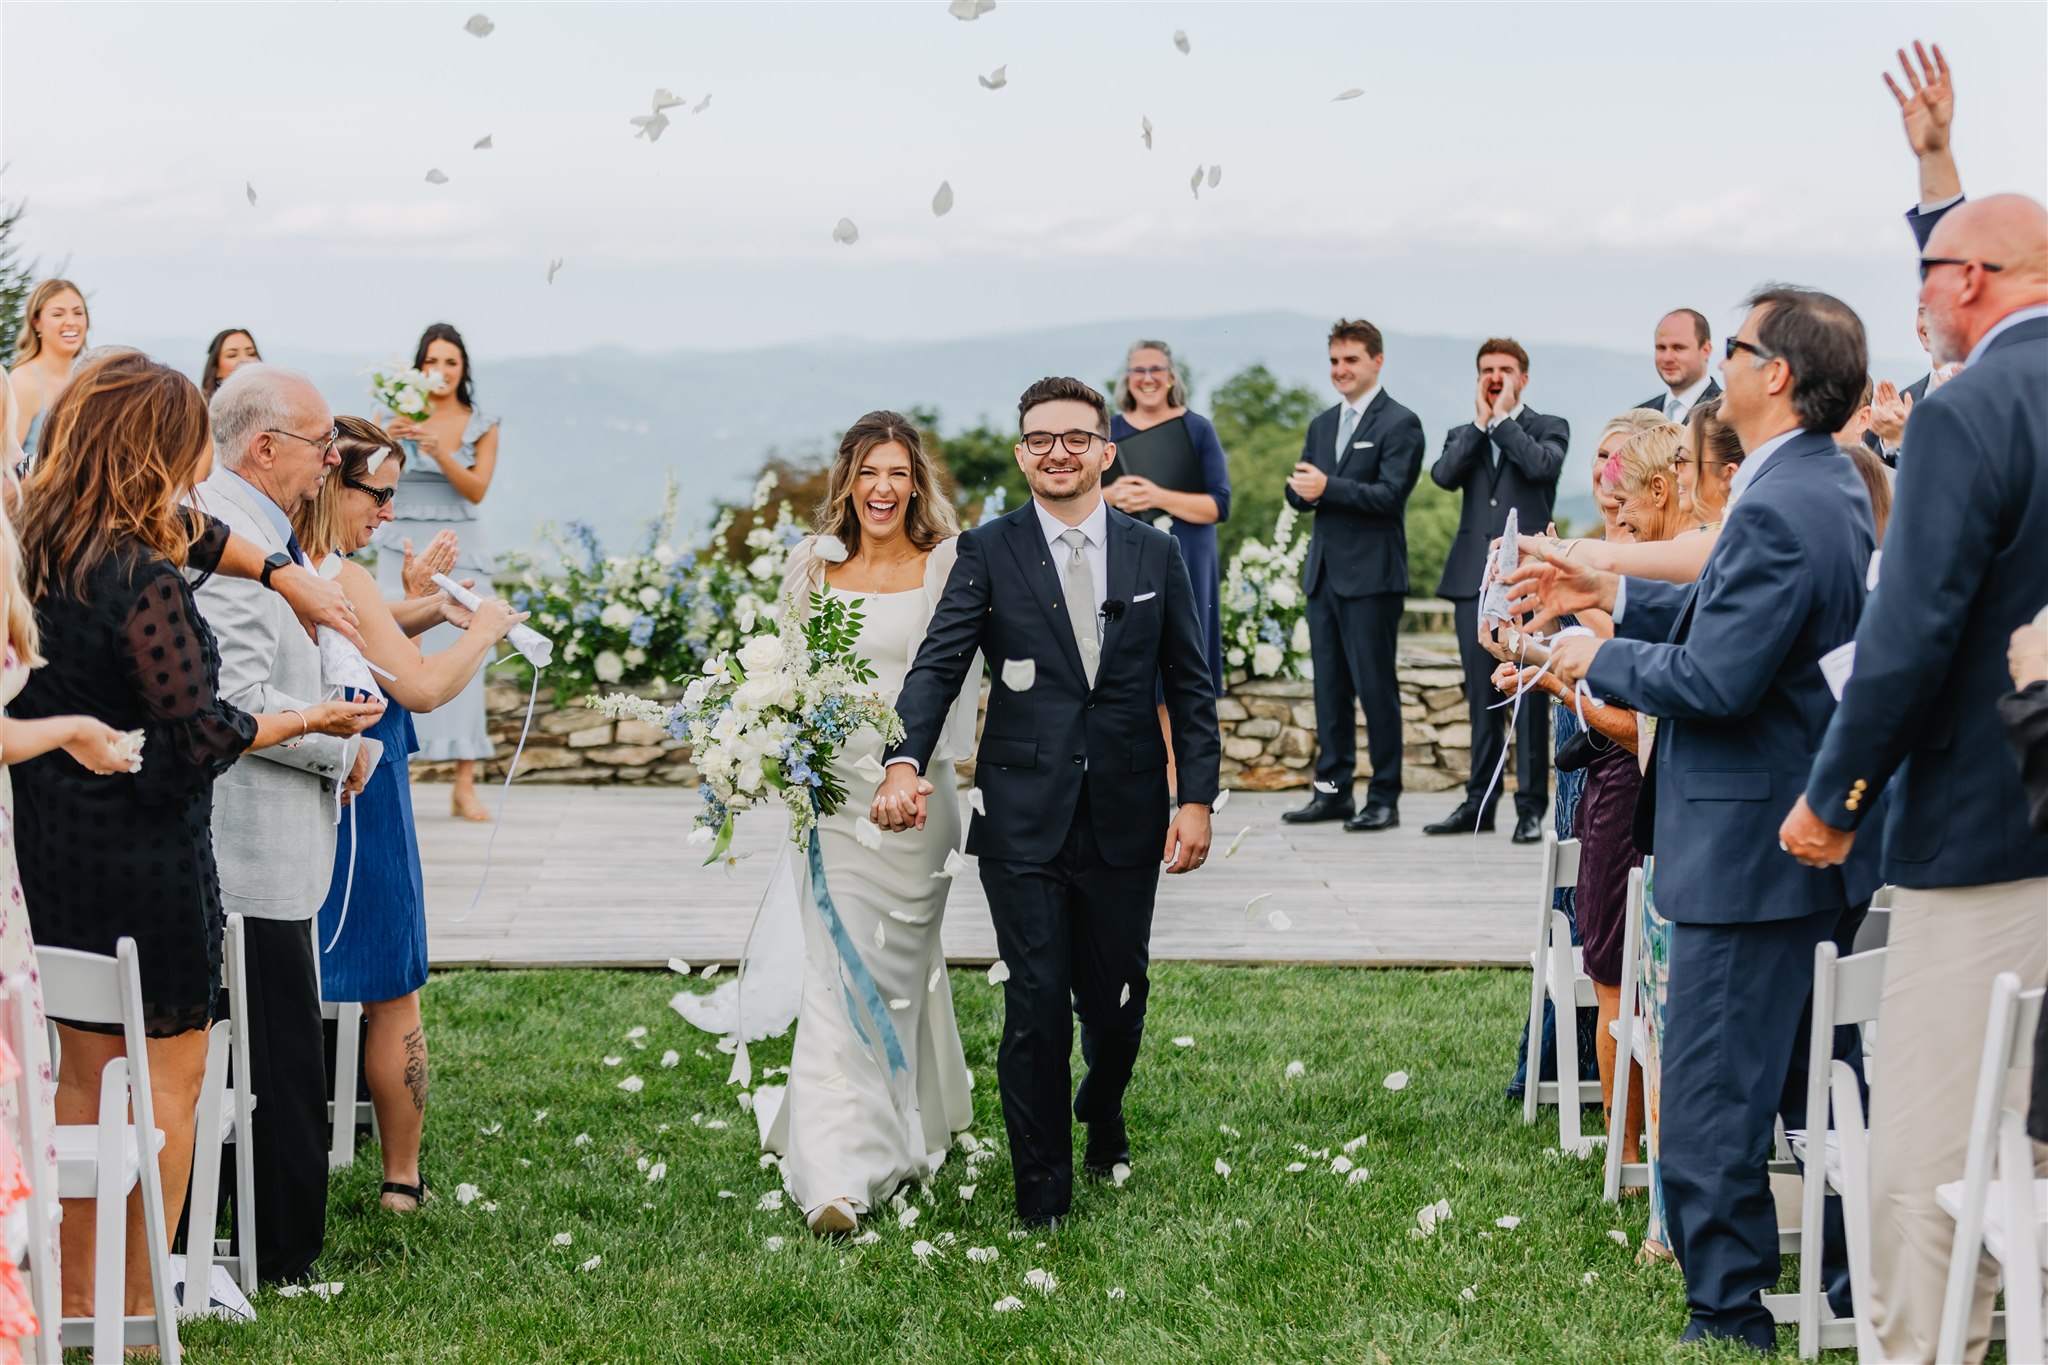 A couple exiting their wedding ceremony with guests tossing petals.